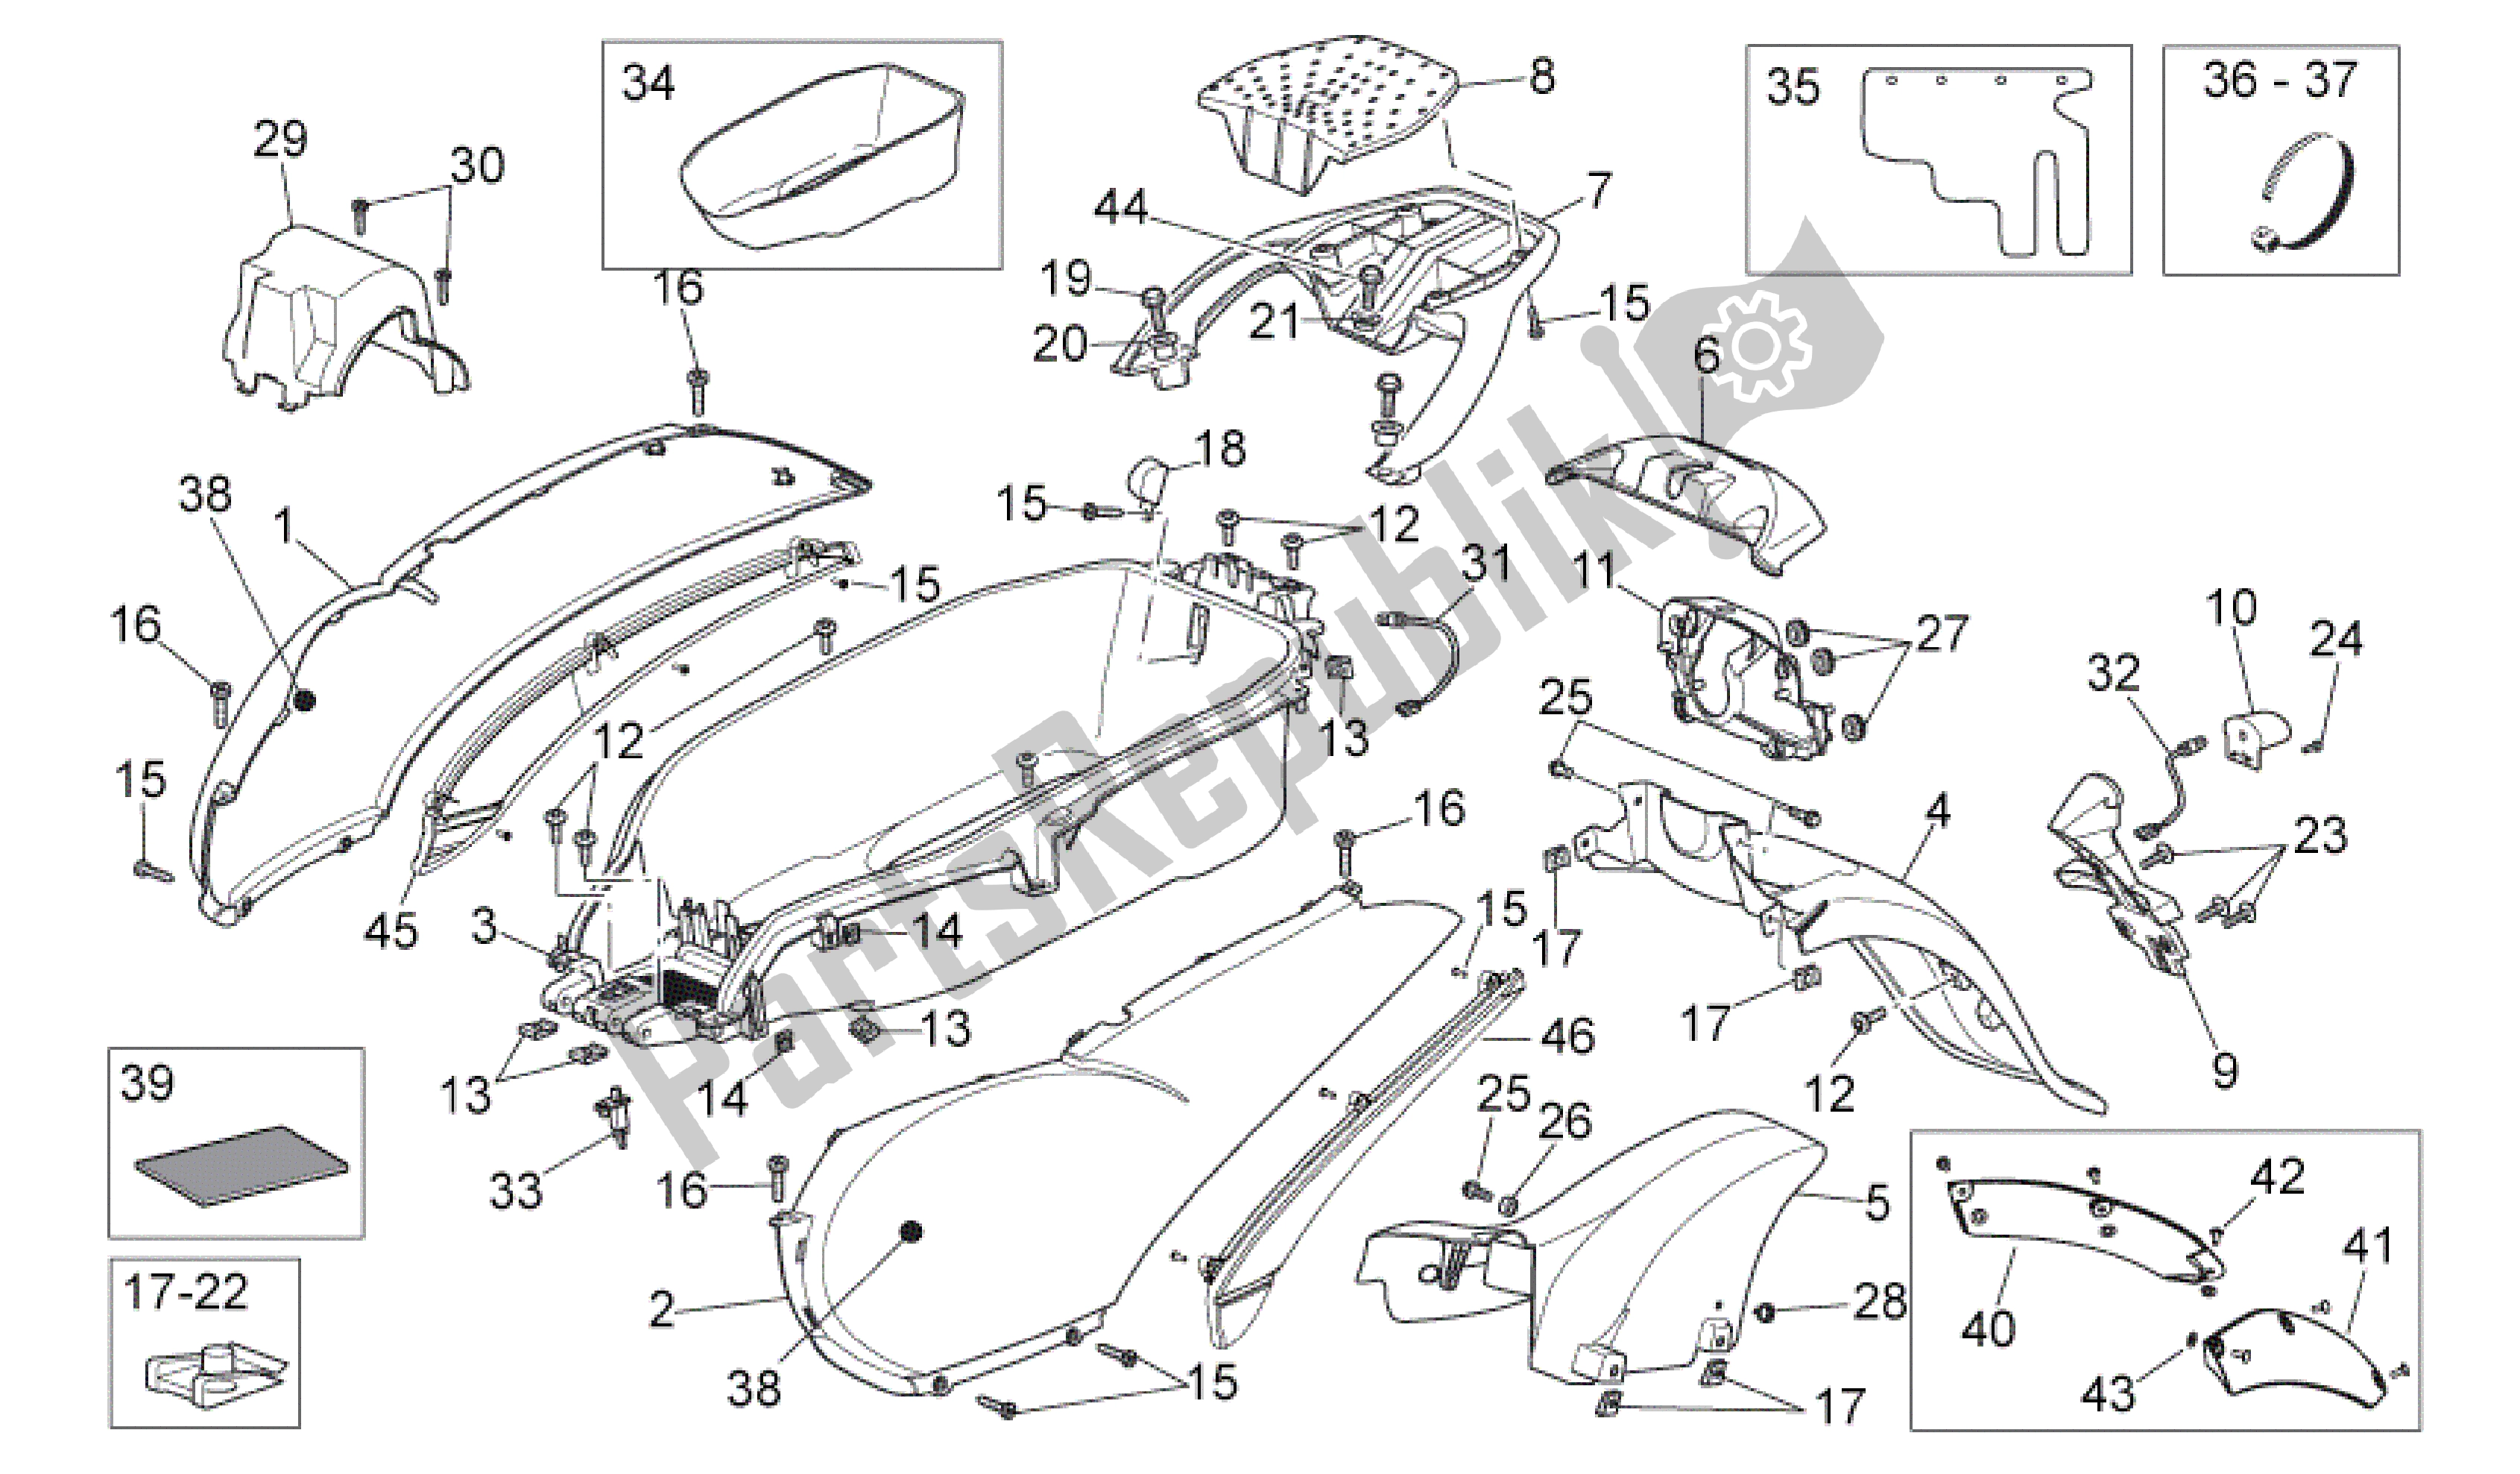 All parts for the Rear Body of the Aprilia Scarabeo 400 2006 - 2008